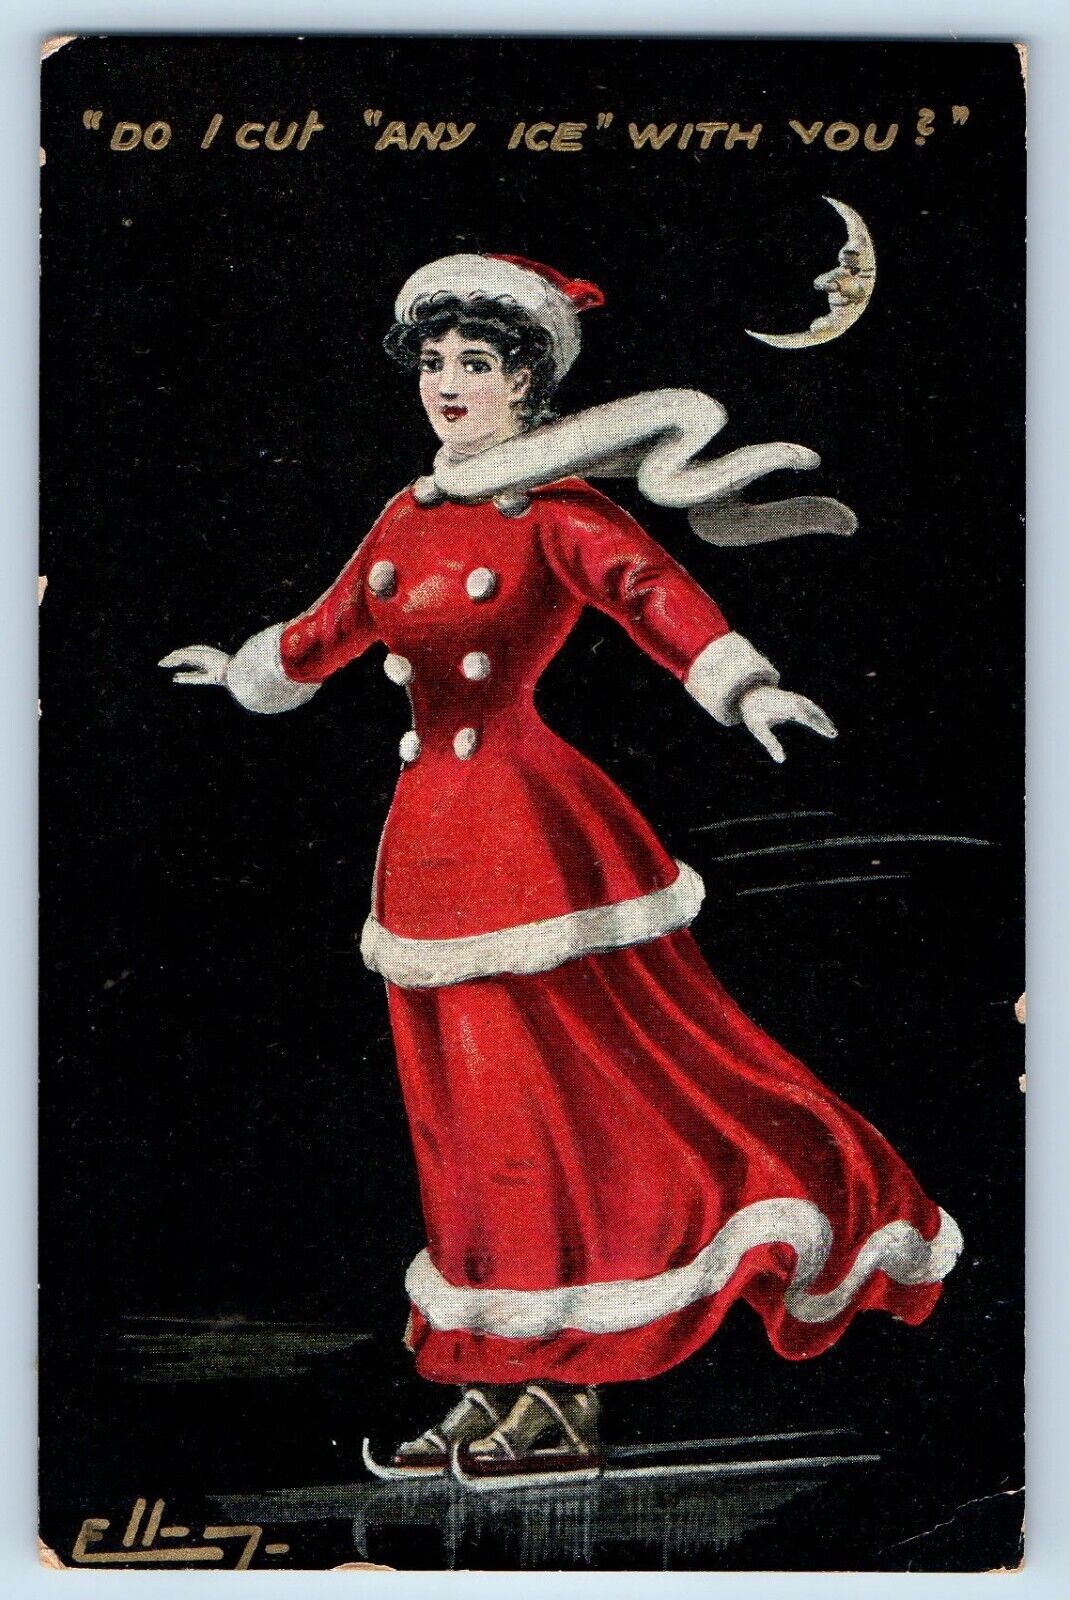 Woman Postcard Face In Moon Ice Skating Do I Cut Any Ice With You 1911 Antique